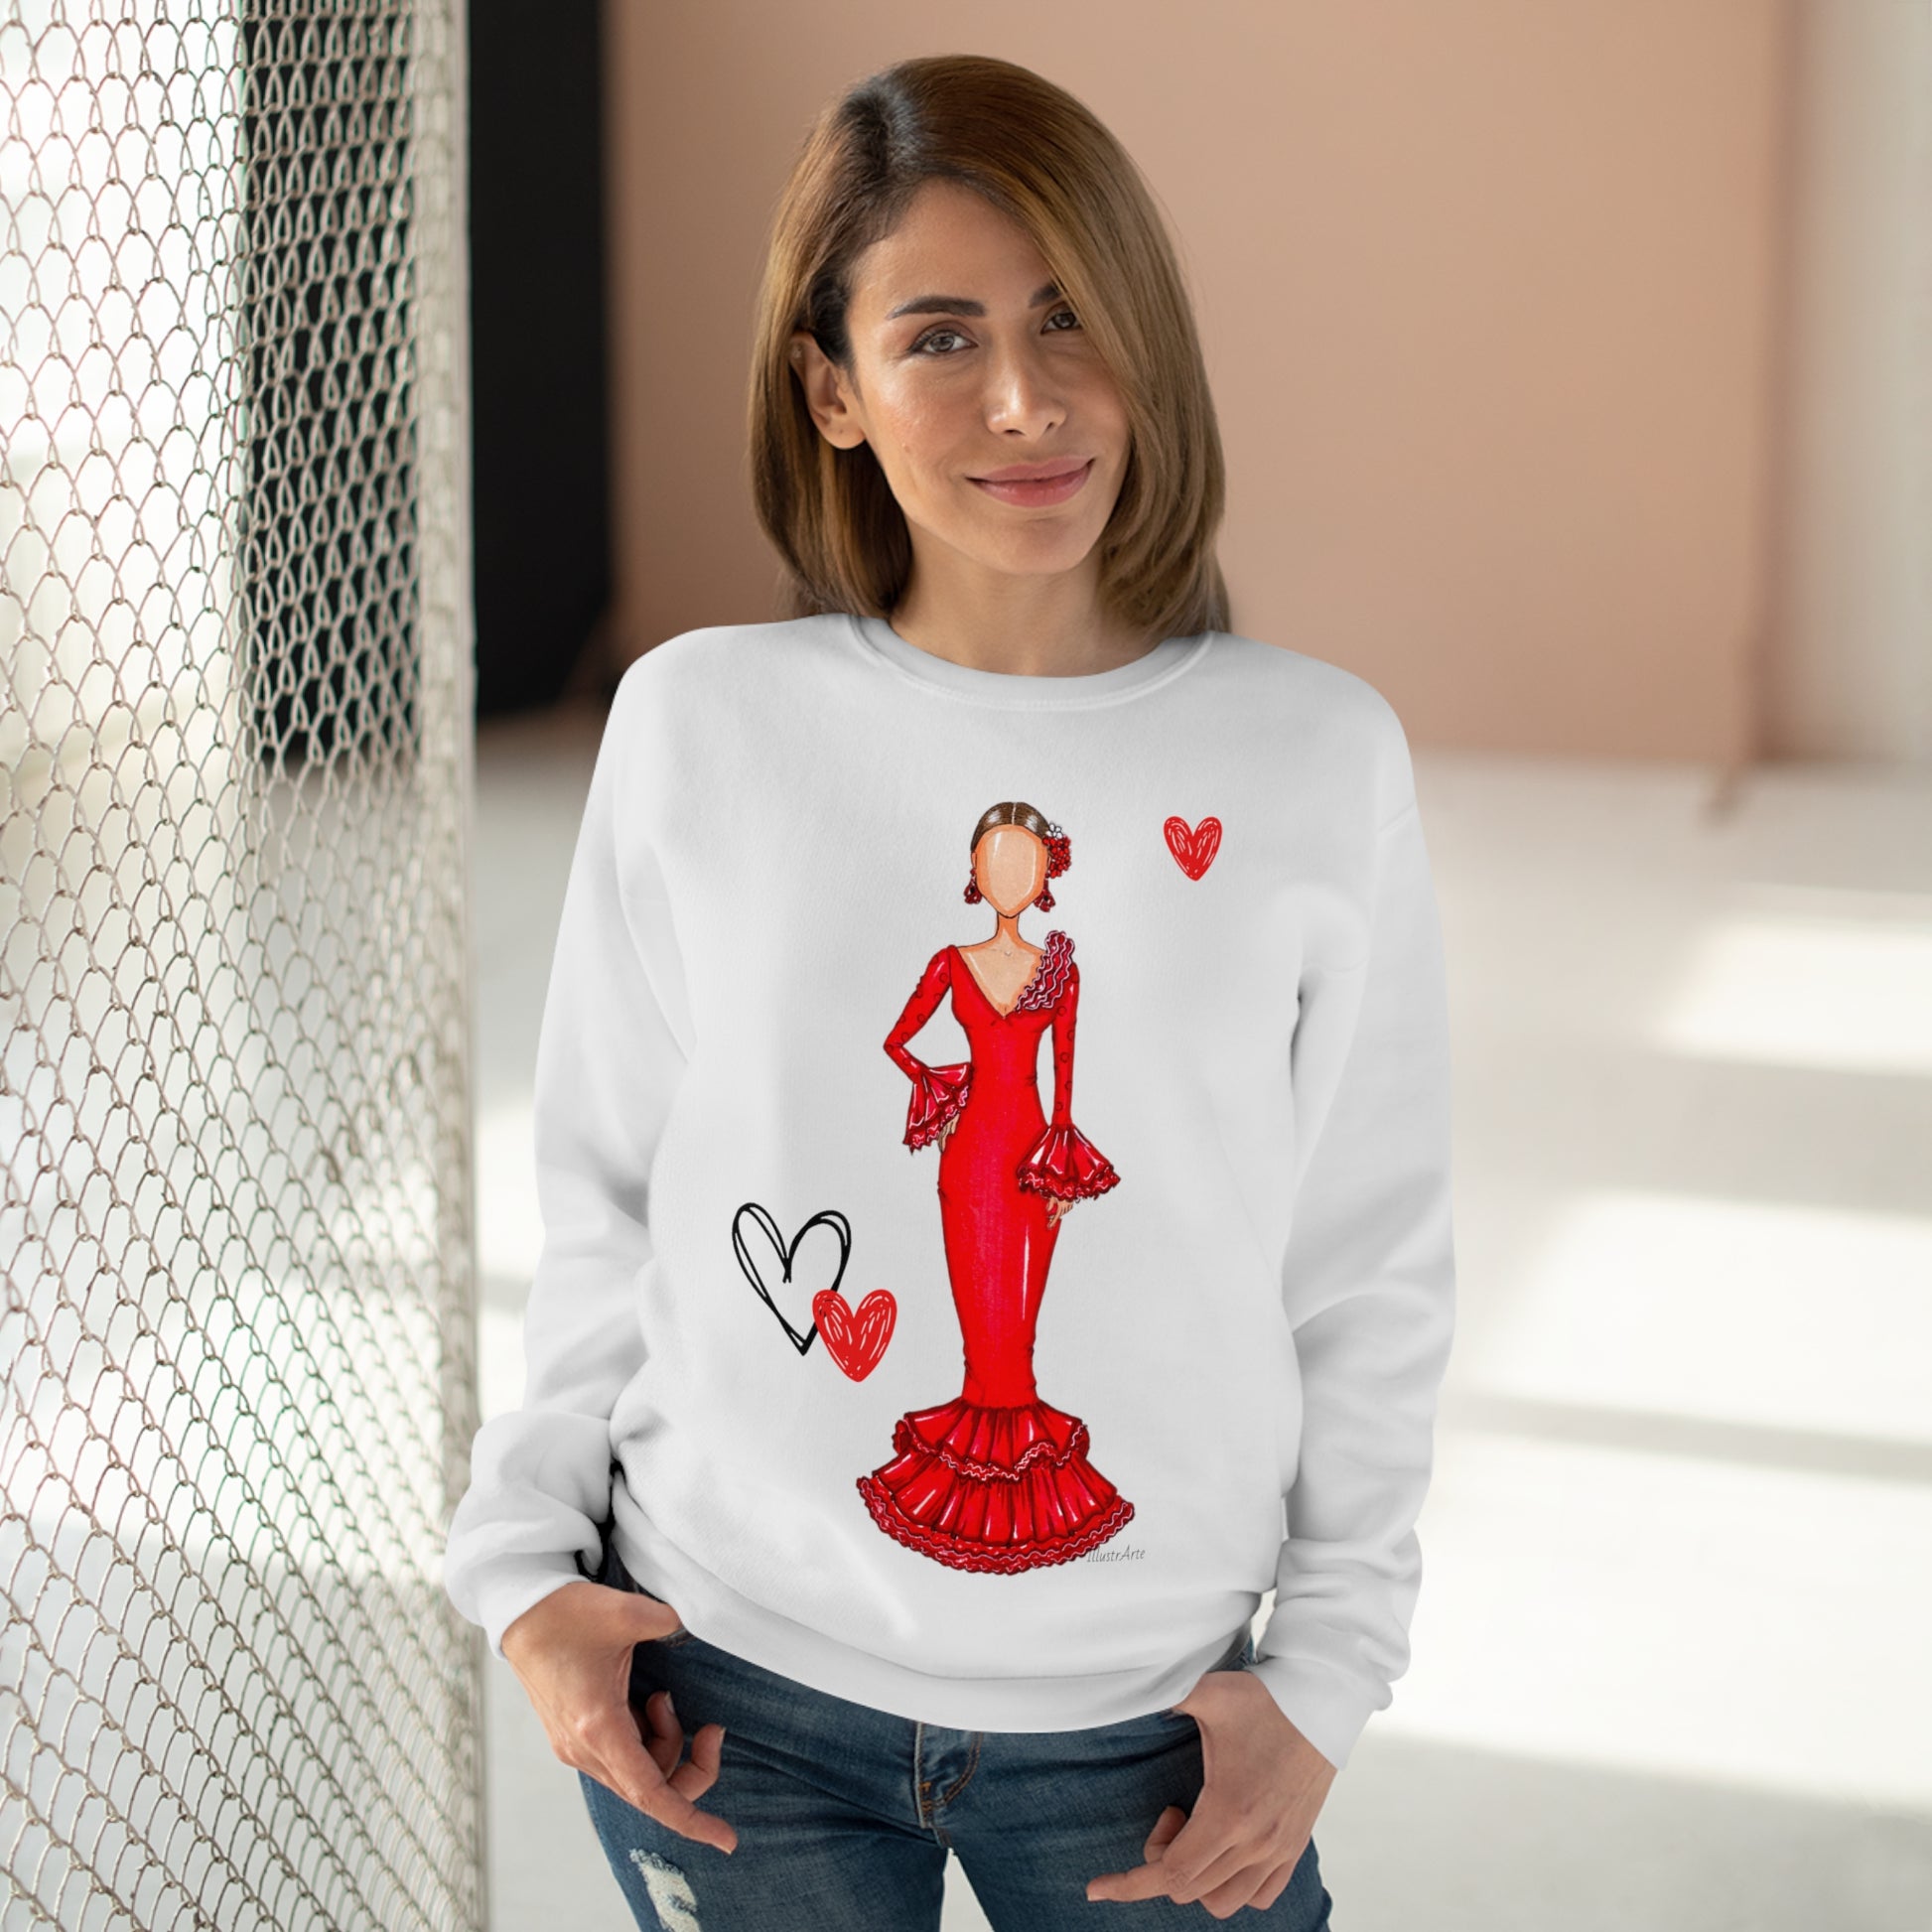 a woman wearing a red dress with hearts on it